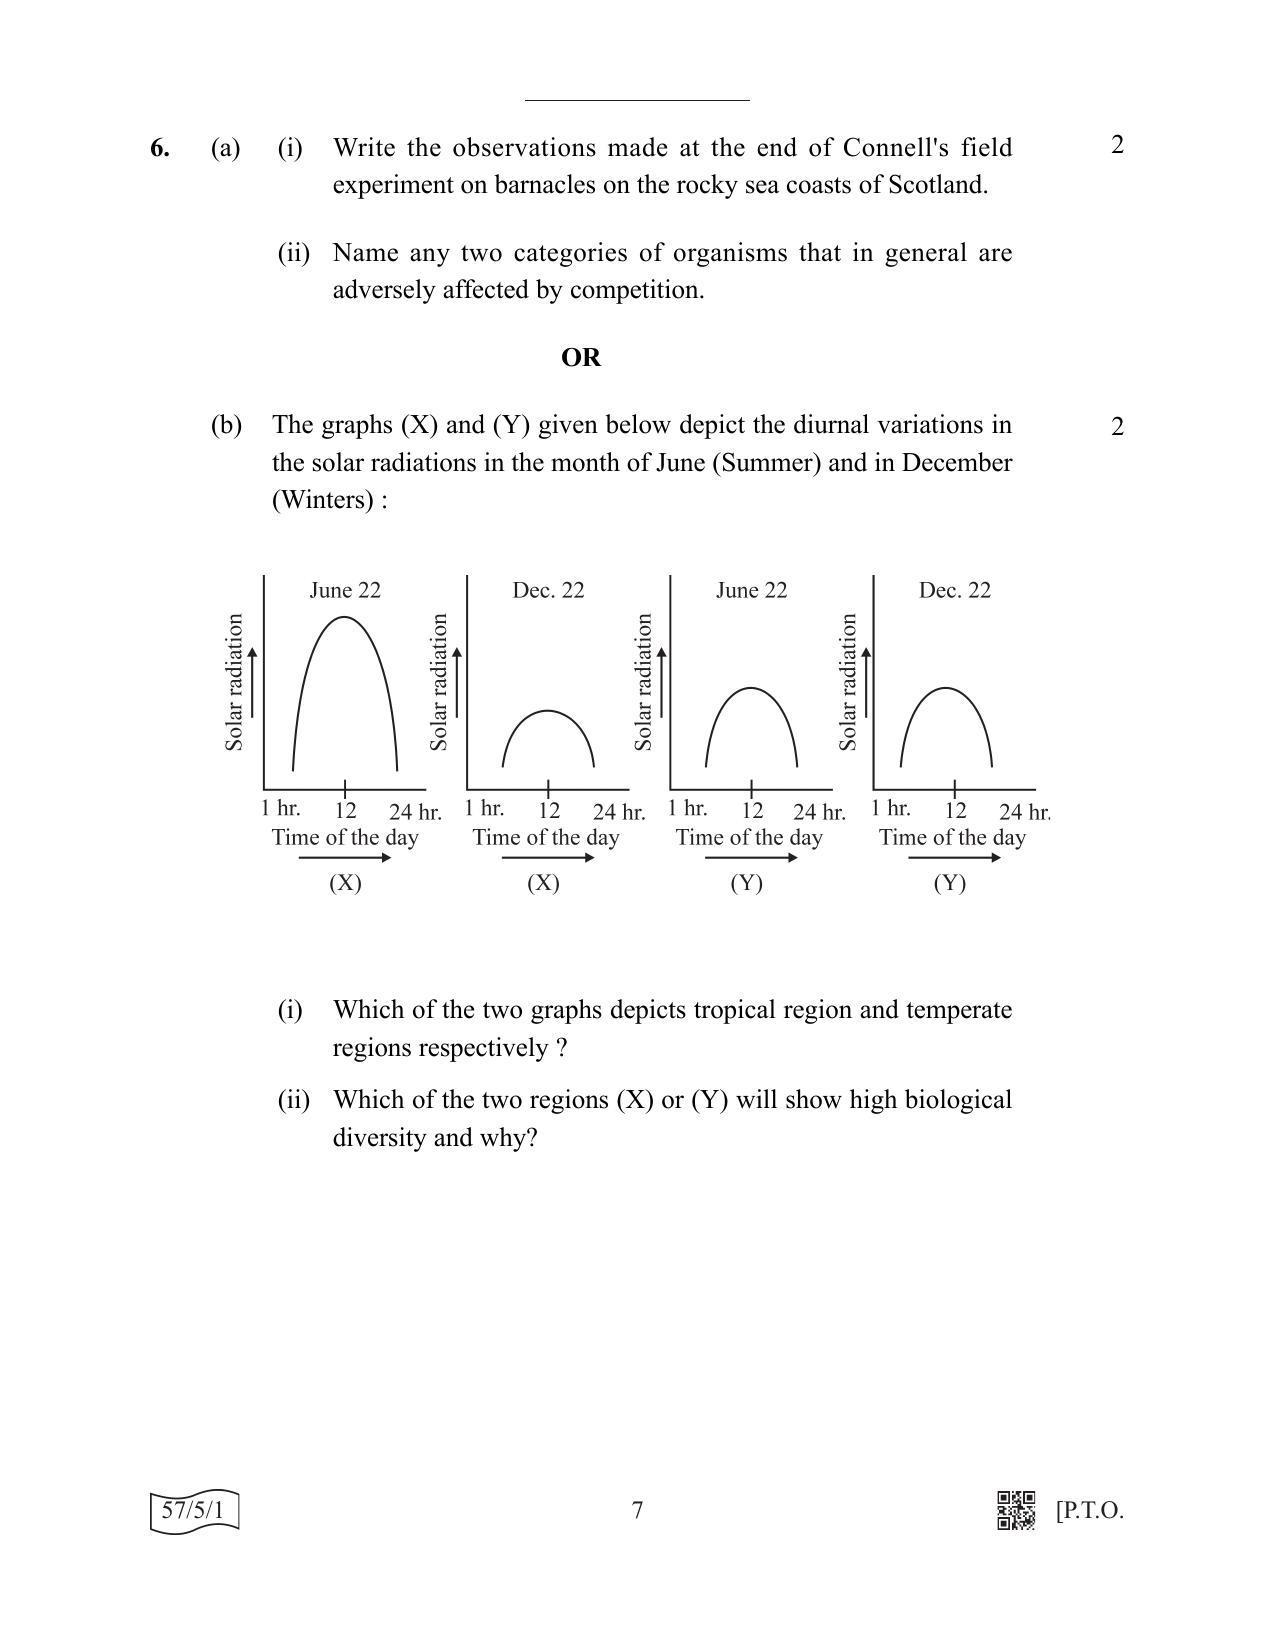 CBSE Class 12 57-5-1 Biology 2022 Question Paper - Page 7